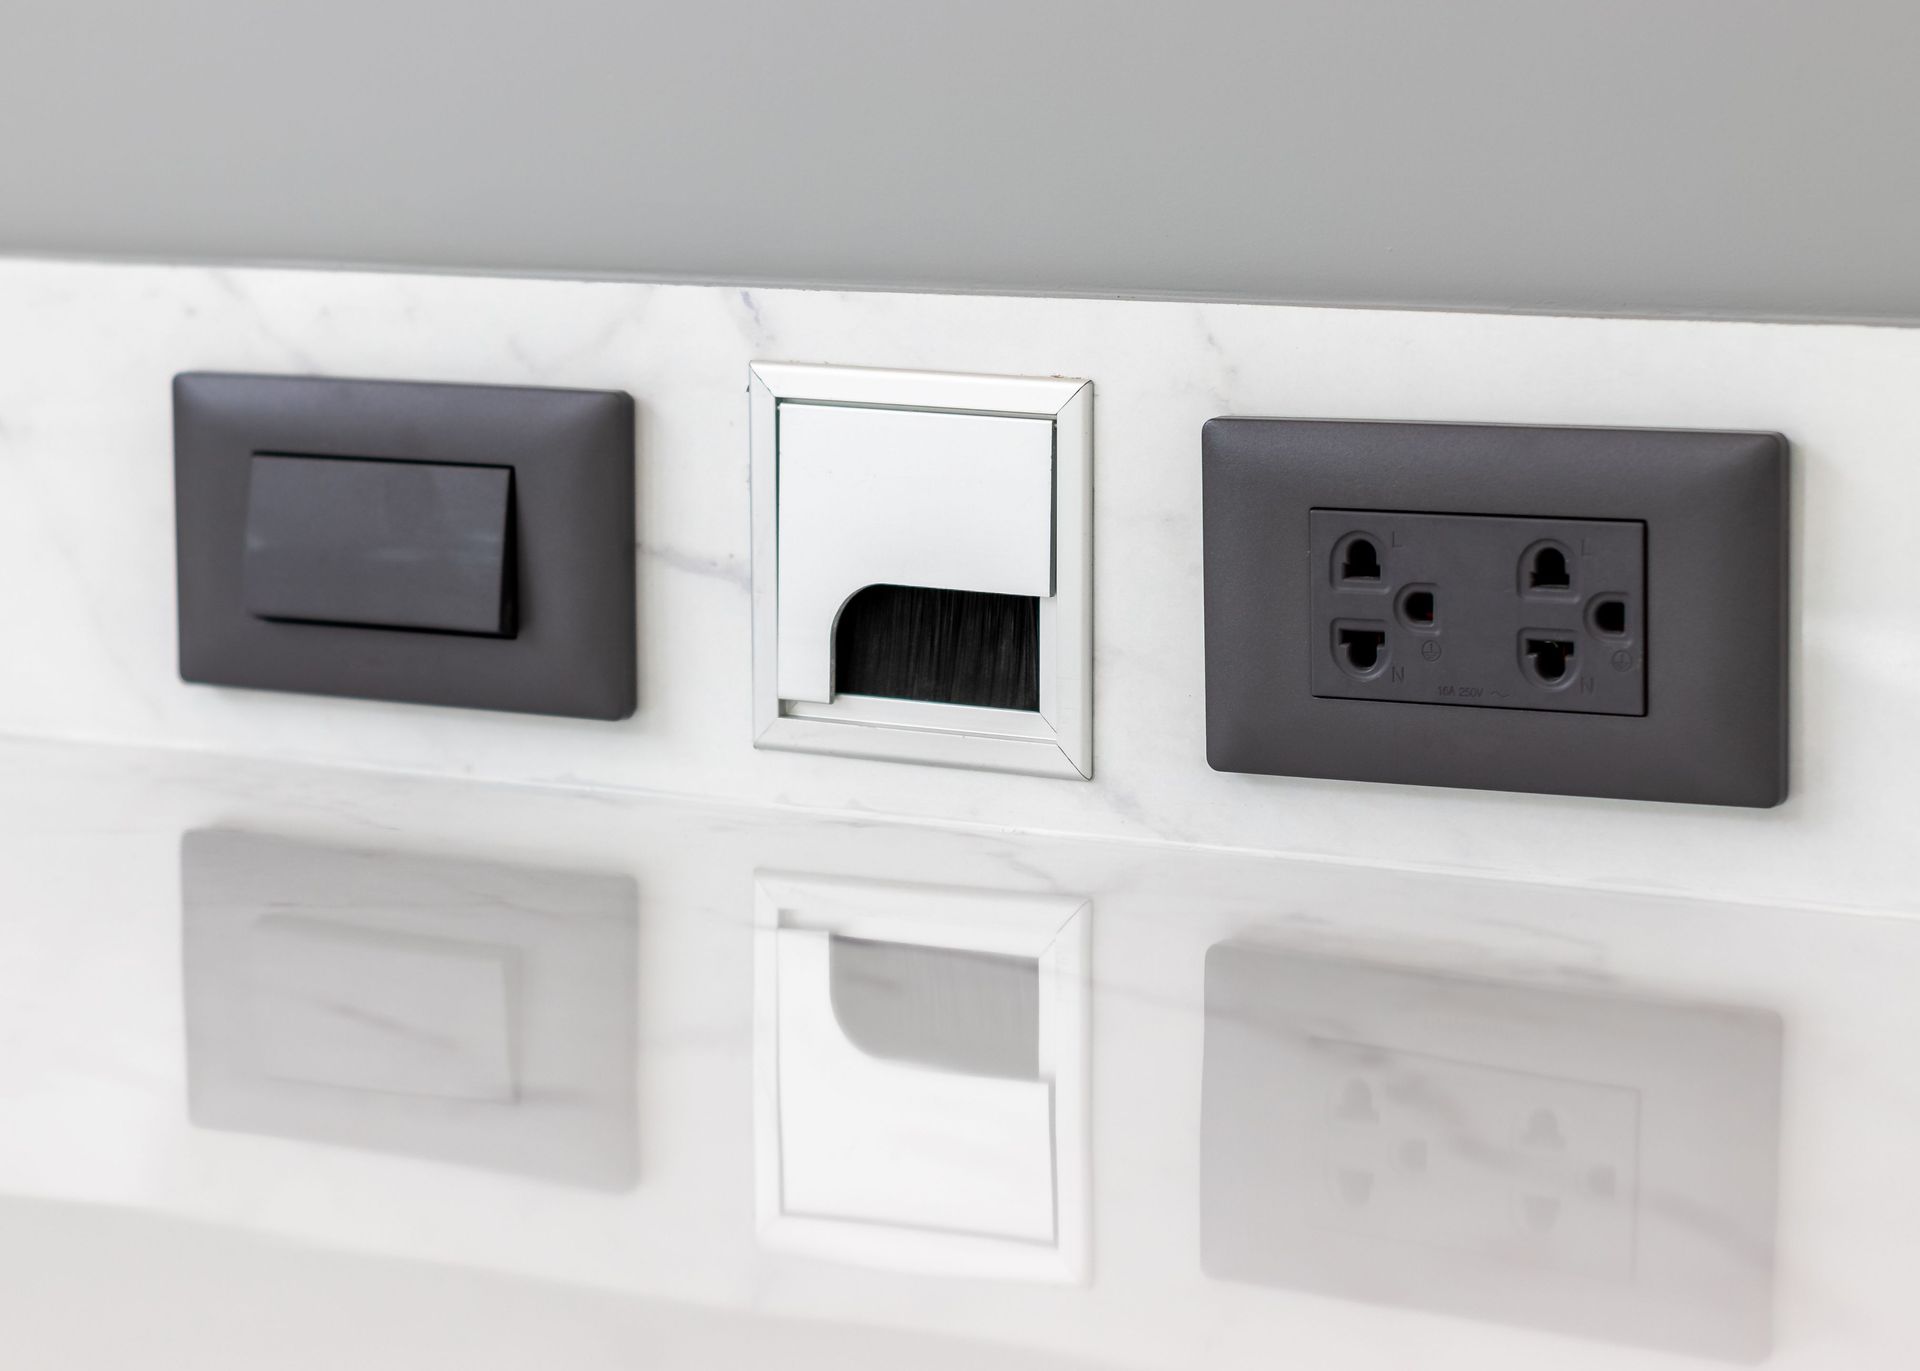 A close up of three electrical outlets and a switch on a wall.